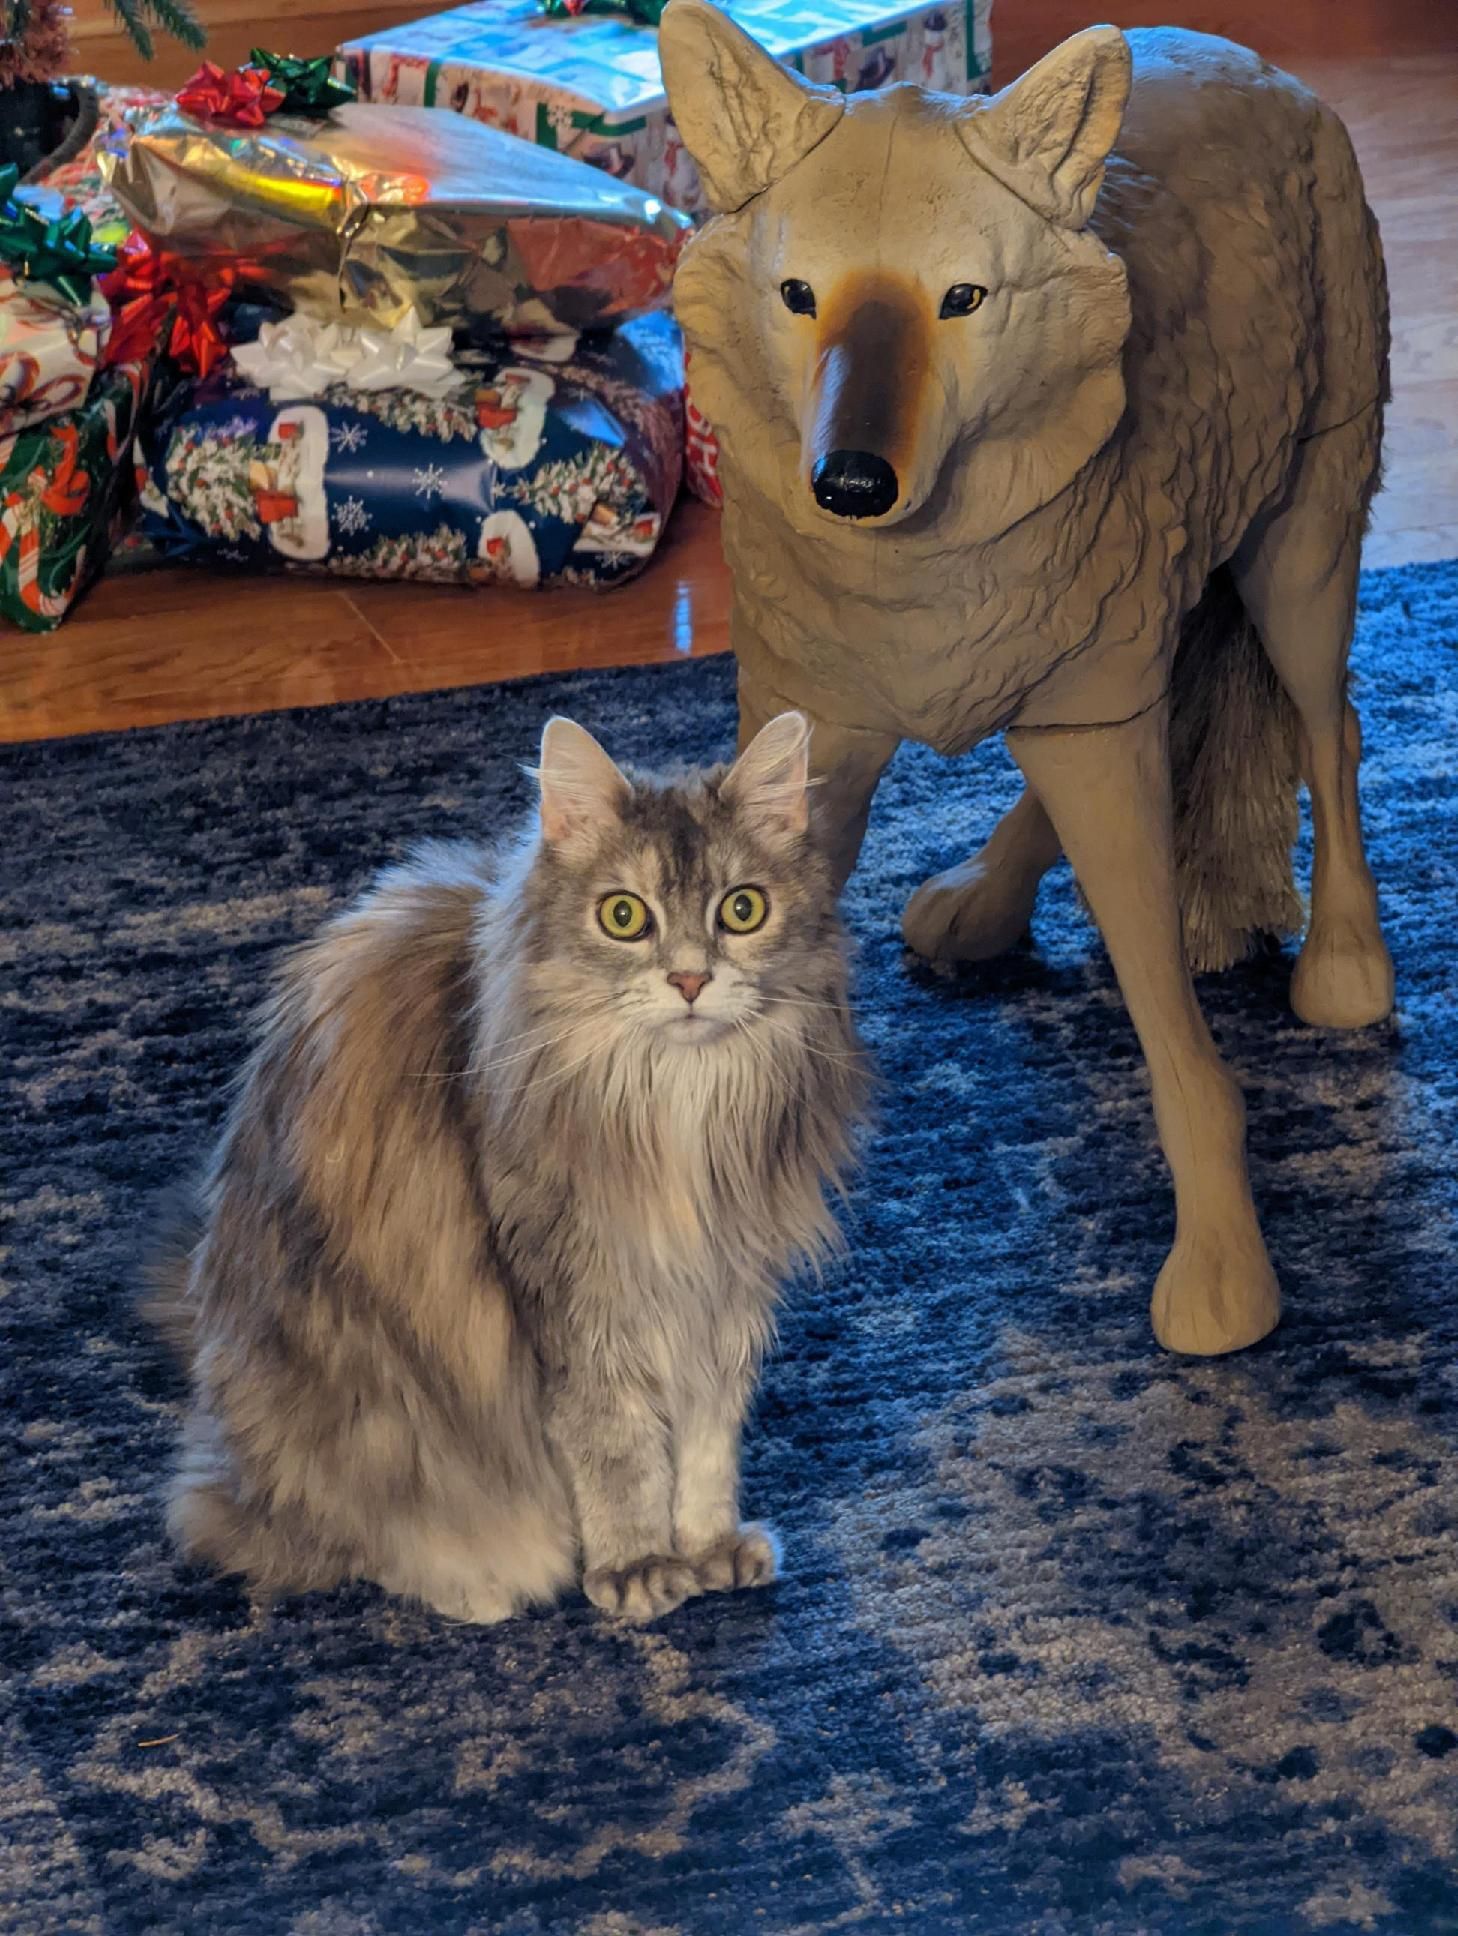 My dad bought my mom a coyote decoy for Christmas… cat loves it